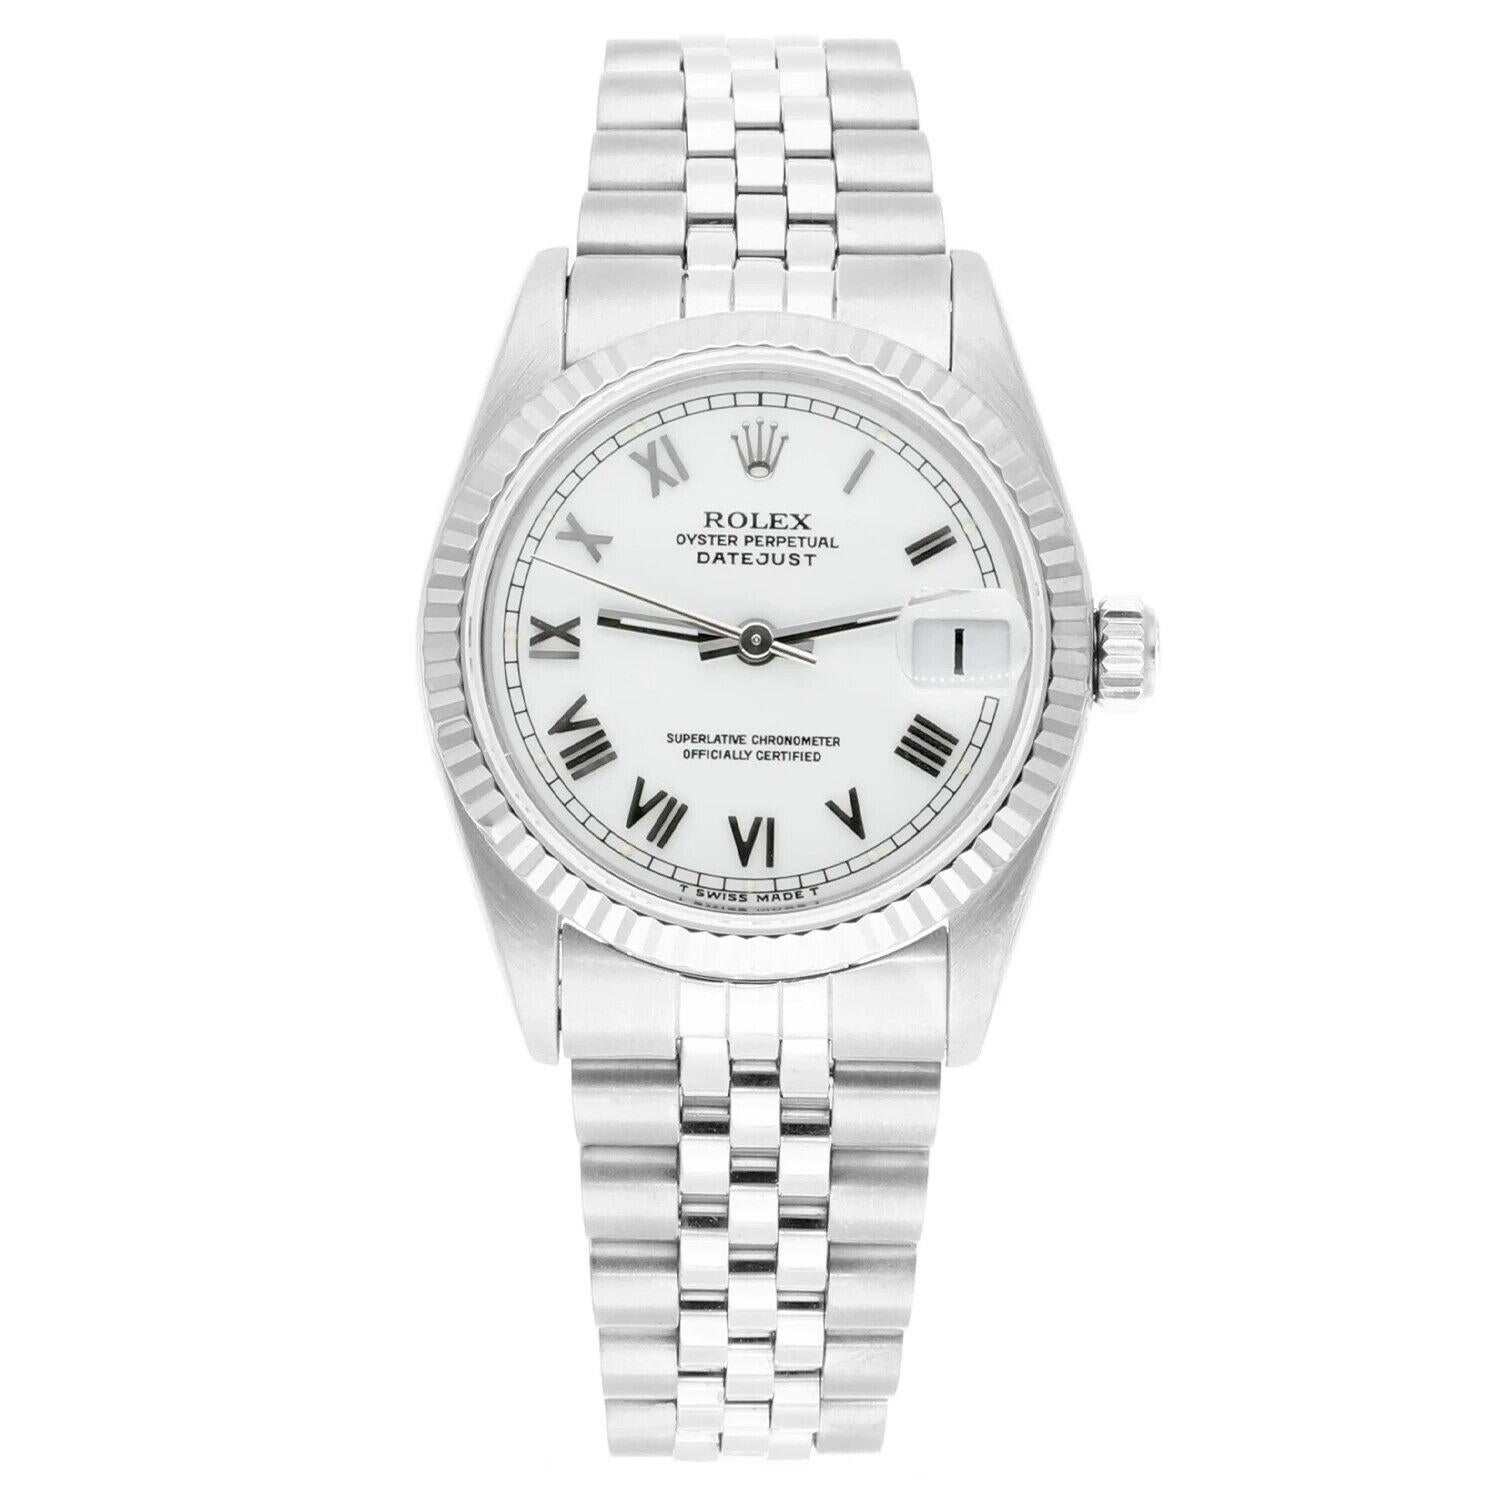 Rolex Datejust 31mm White Roman Dial Stainless Steel Watch White Gold Bezel, Jubilee Bracelet, T series.
Silver-tone stainless steel case with a silver-tone stainless steel jubilee bracelet. Fixed 18kt white gold bezel. White dial with silver-tone